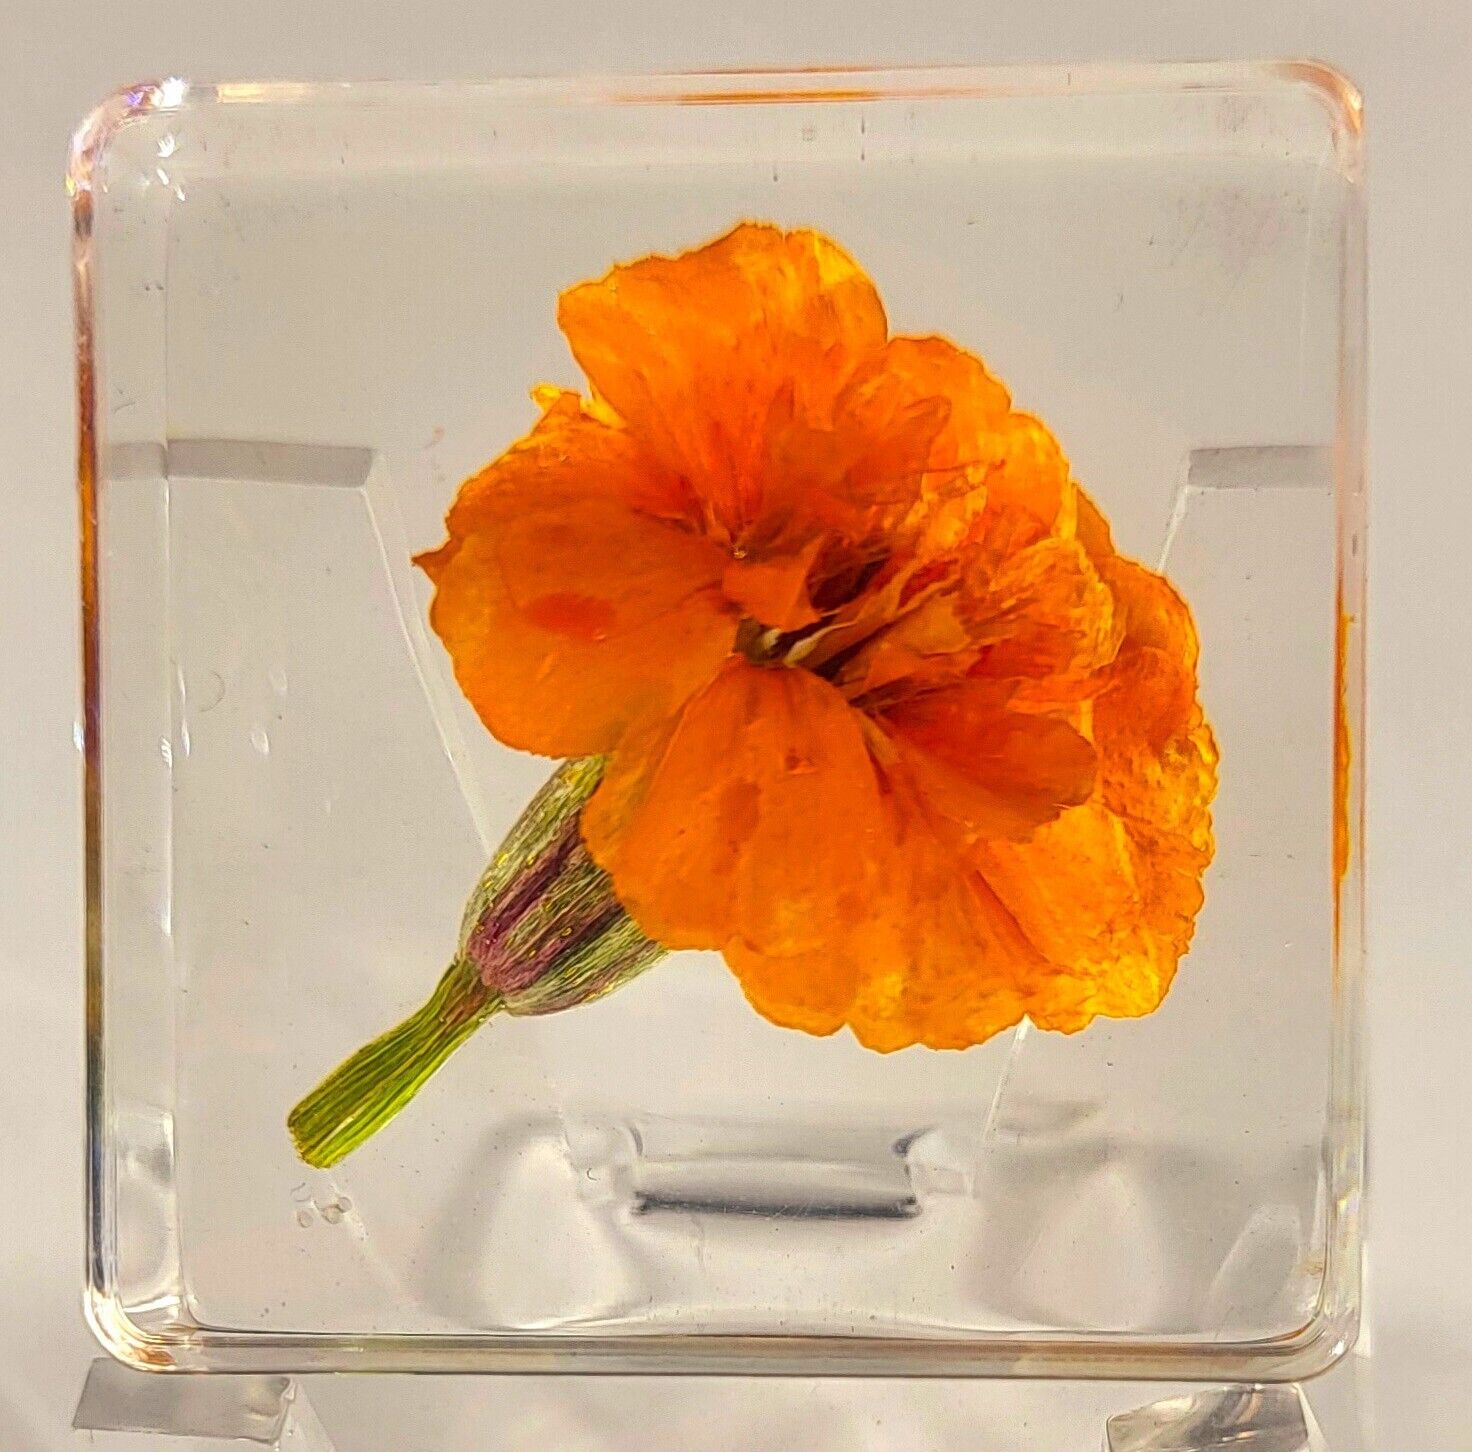 38mm French Marigold in Clear Resin Botany Herb Science Education Specimen Block